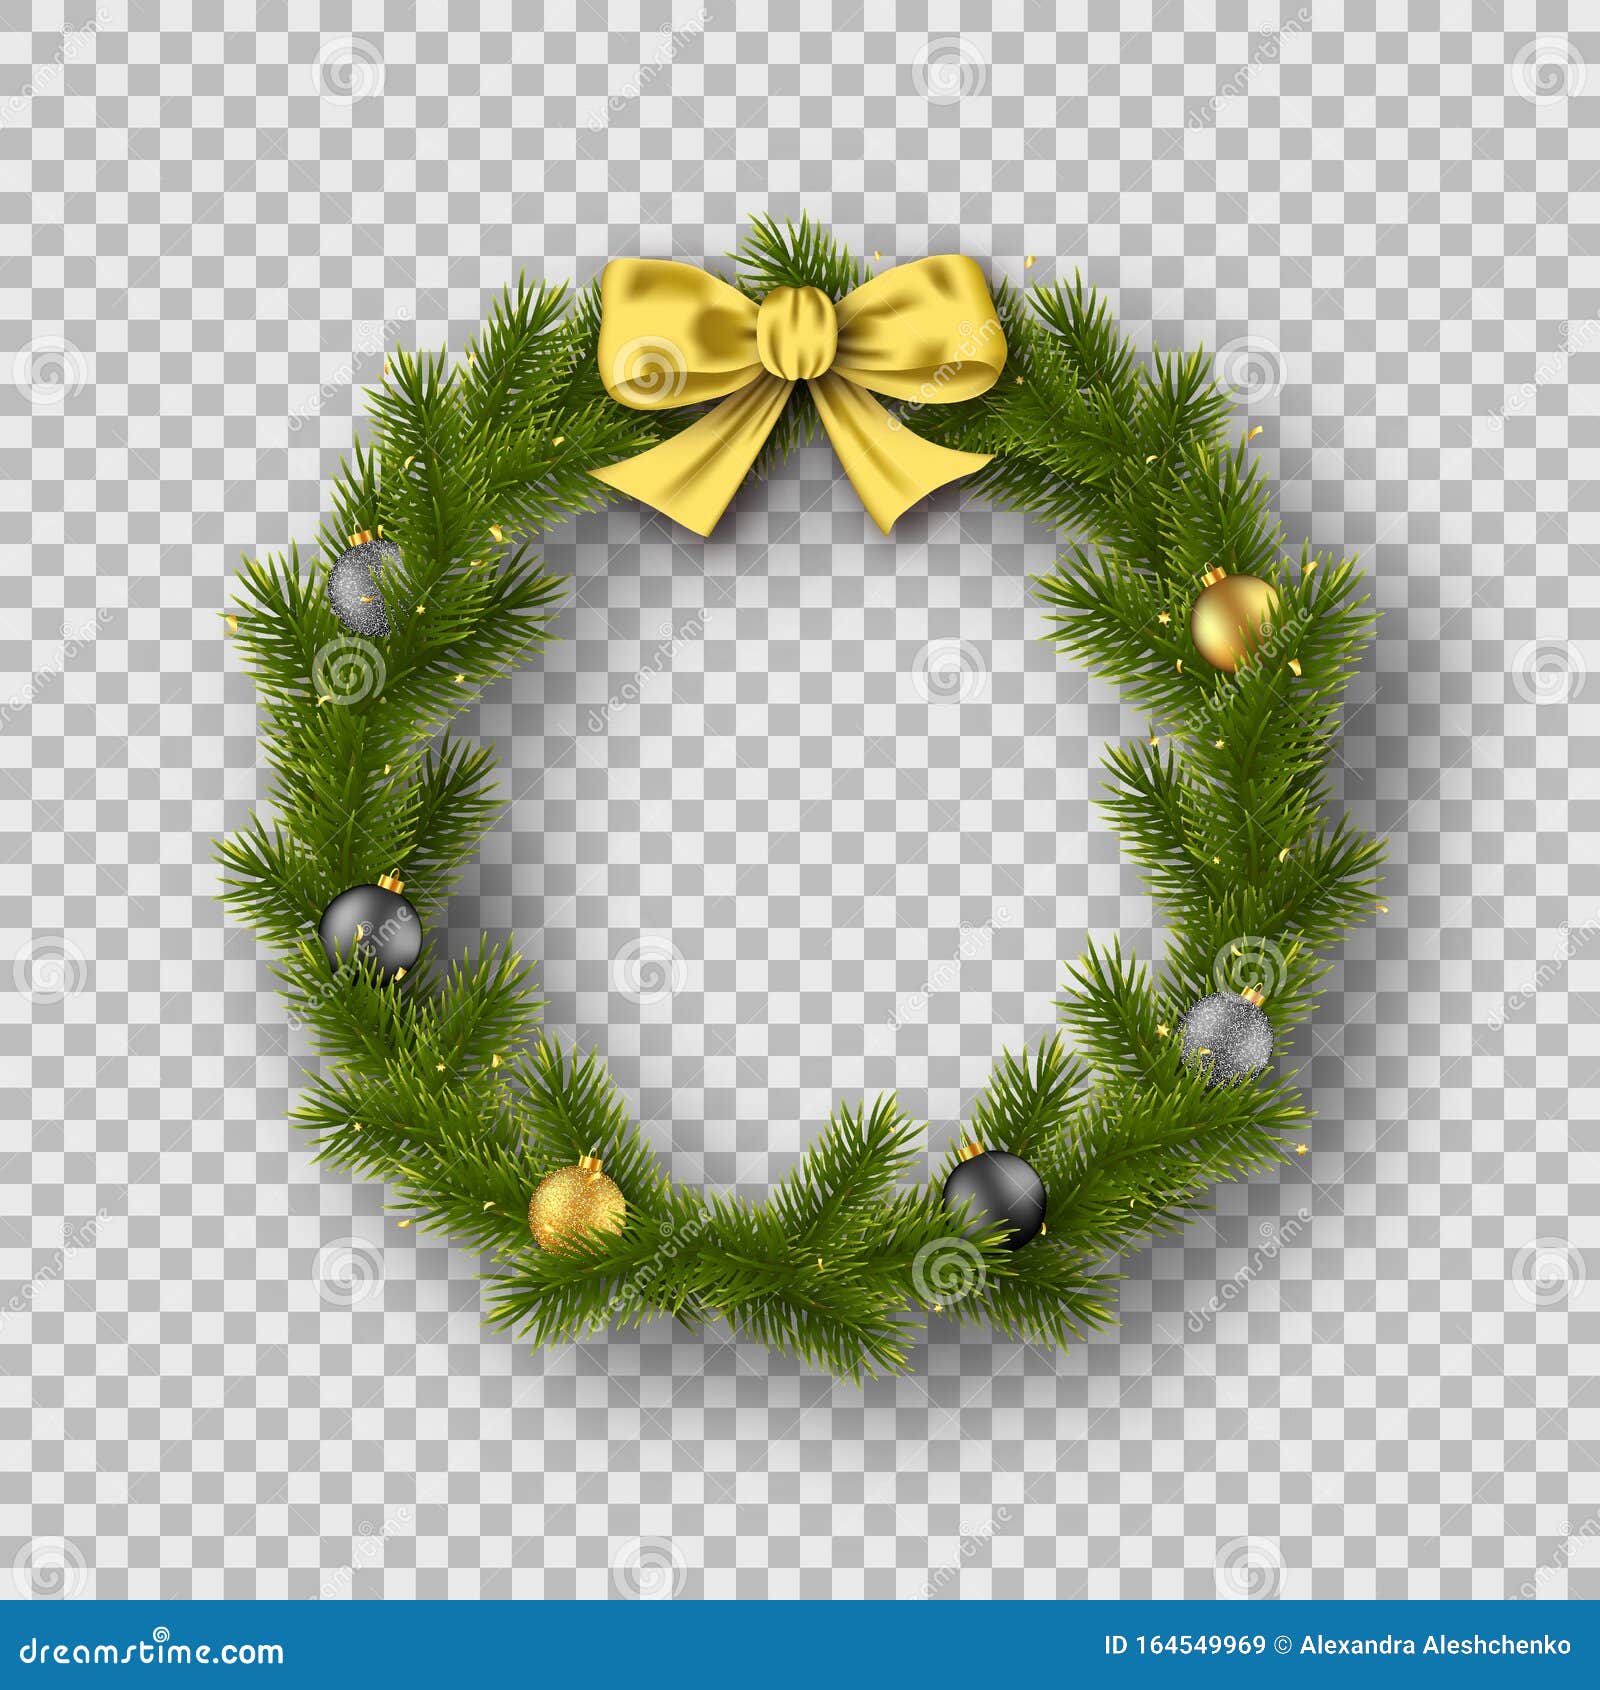 Realistic Christmas Wreath Isolated on Transparent Background Stock Vector  - Illustration of celebration, december: 164549969